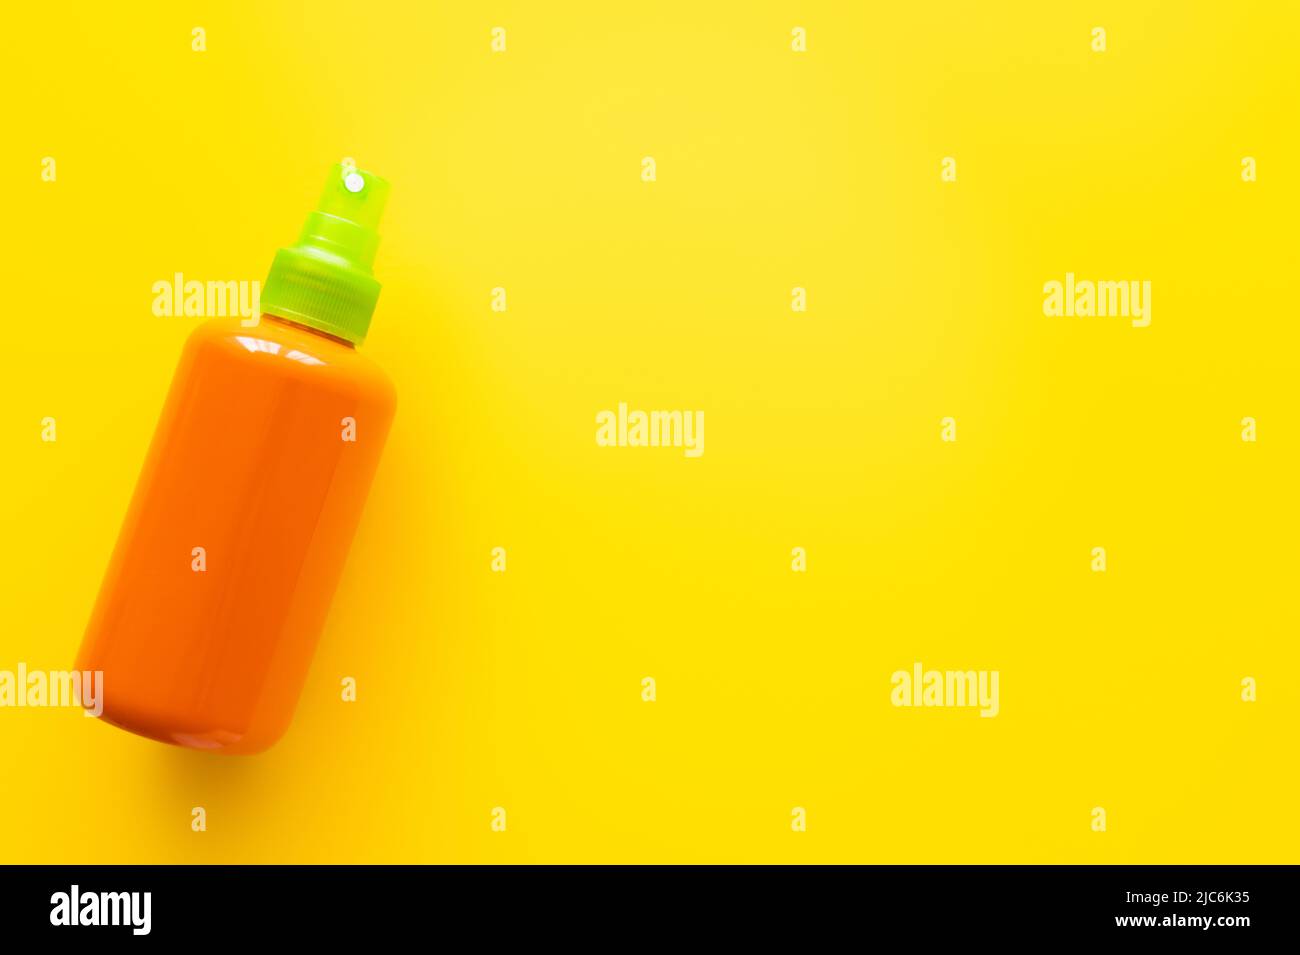 Top view of bottle of sunscreen on yellow surface Stock Photo